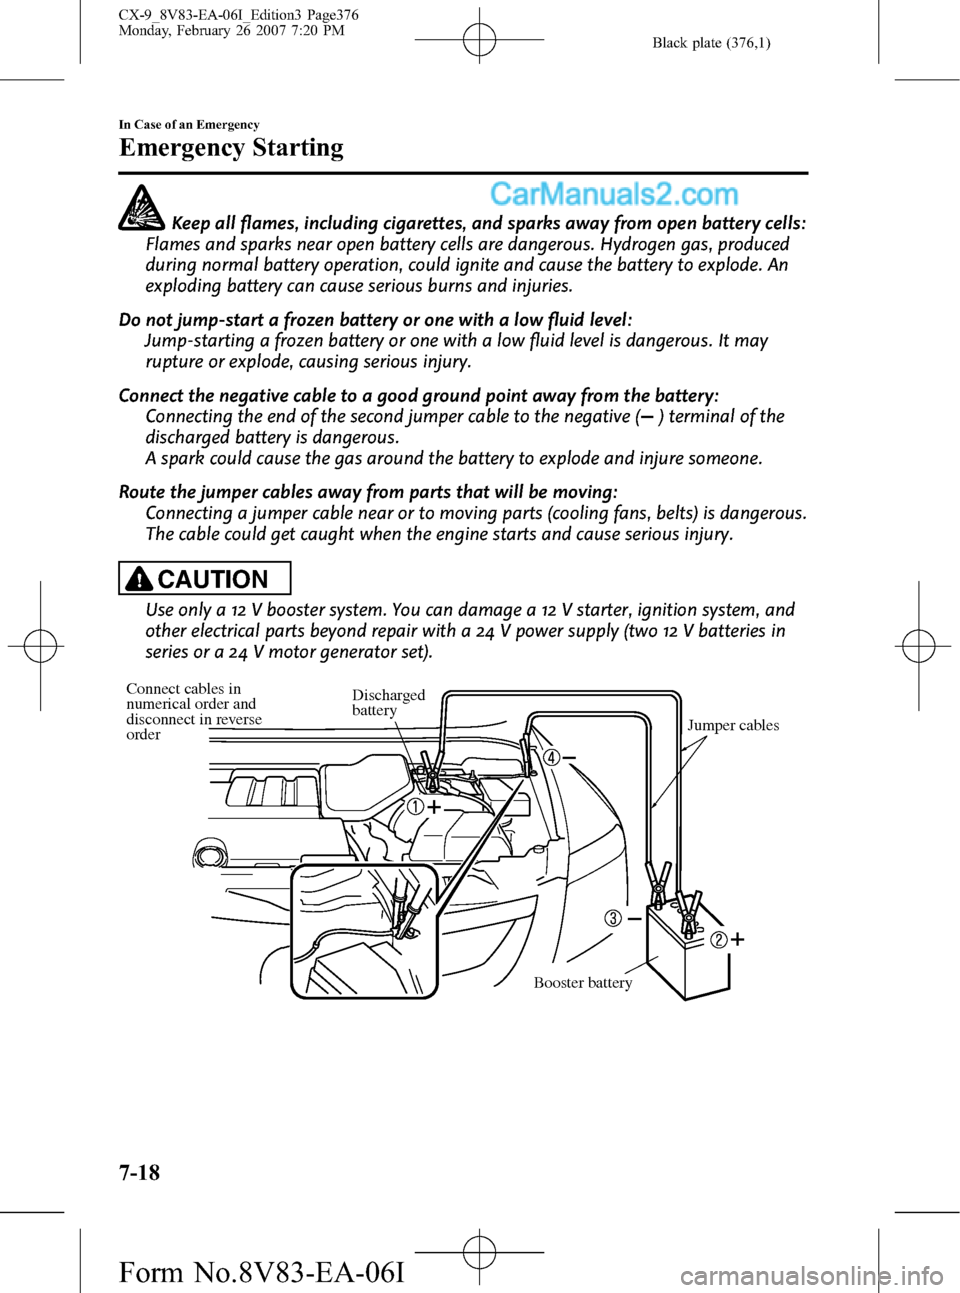 MAZDA MODEL CX-9 2007  Owners Manual (in English) Black plate (376,1)
Keep all flames, including cigarettes, and sparks away from open battery cells:
Flames and sparks near open battery cells are dangerous. Hydrogen gas, produced
during normal batter